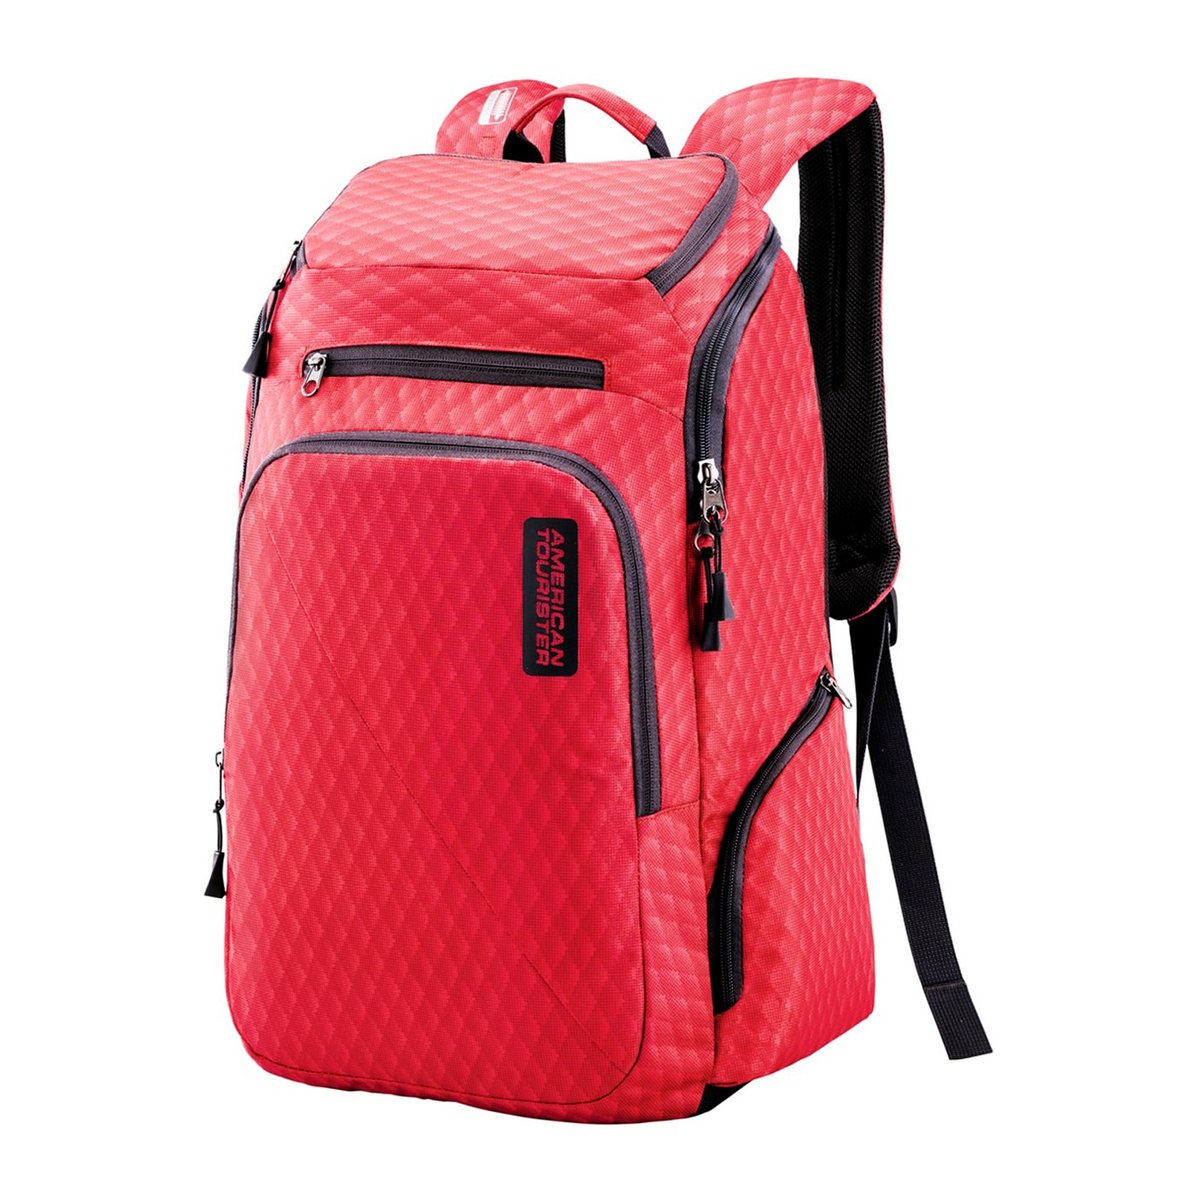 American Tourister Laptop Backpack Acro 003 Red